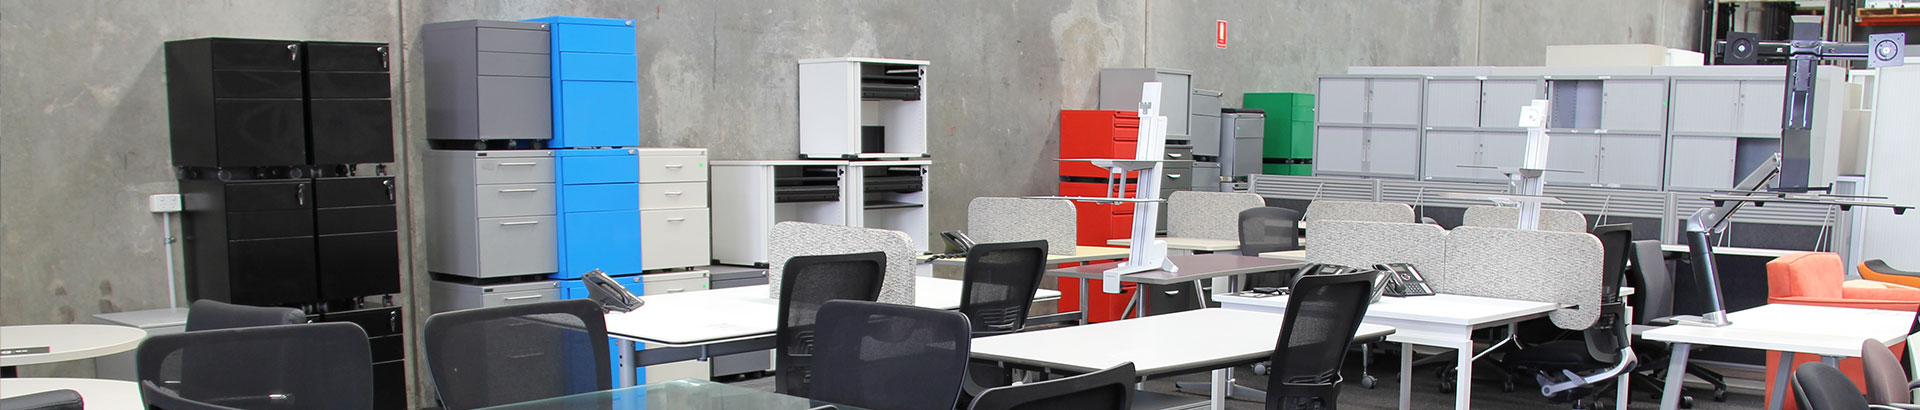 Contact Sustainable Office Solutions about buying old office furniture